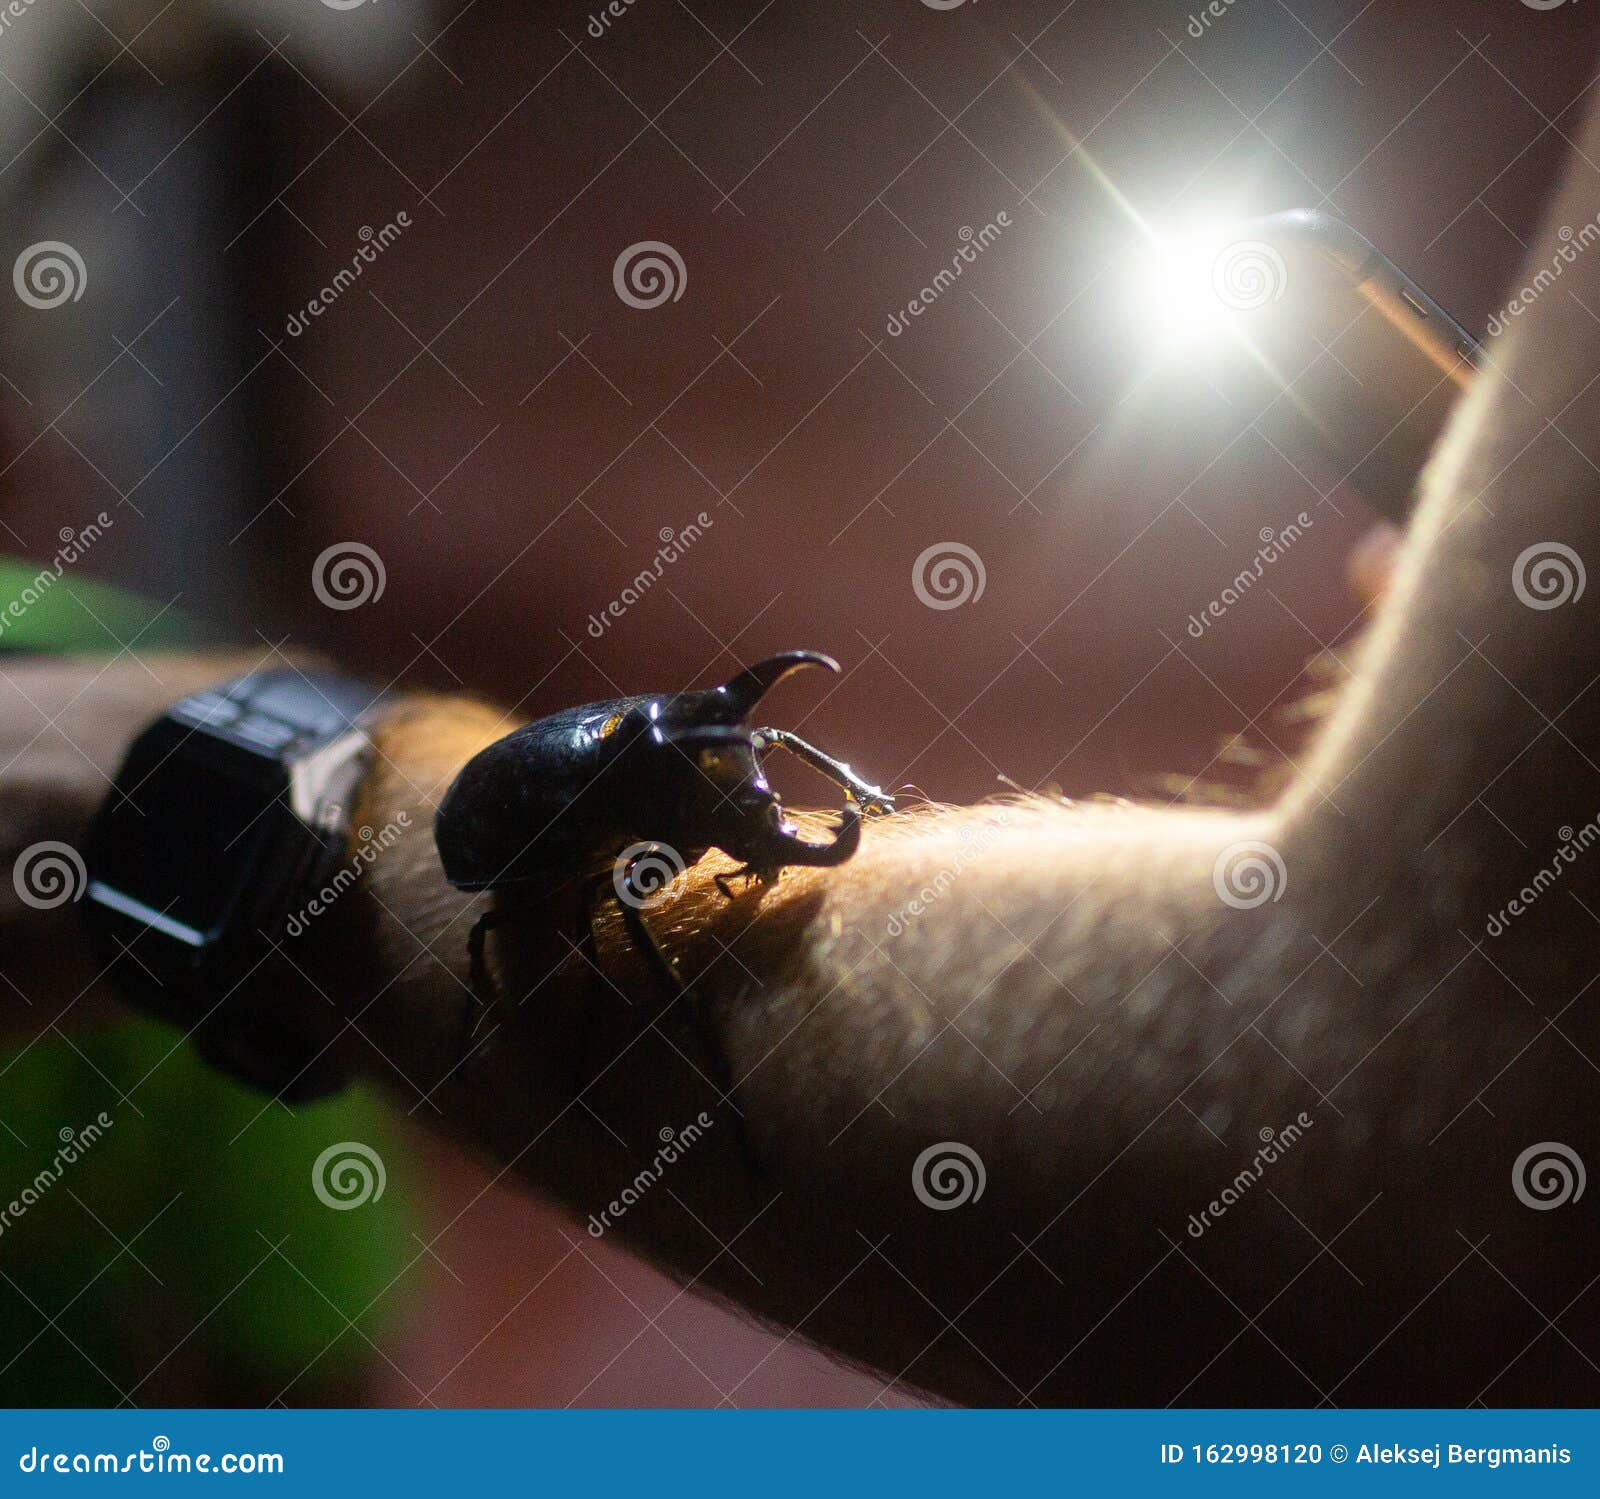 giant bug atlas black beetle on the mans hand night time